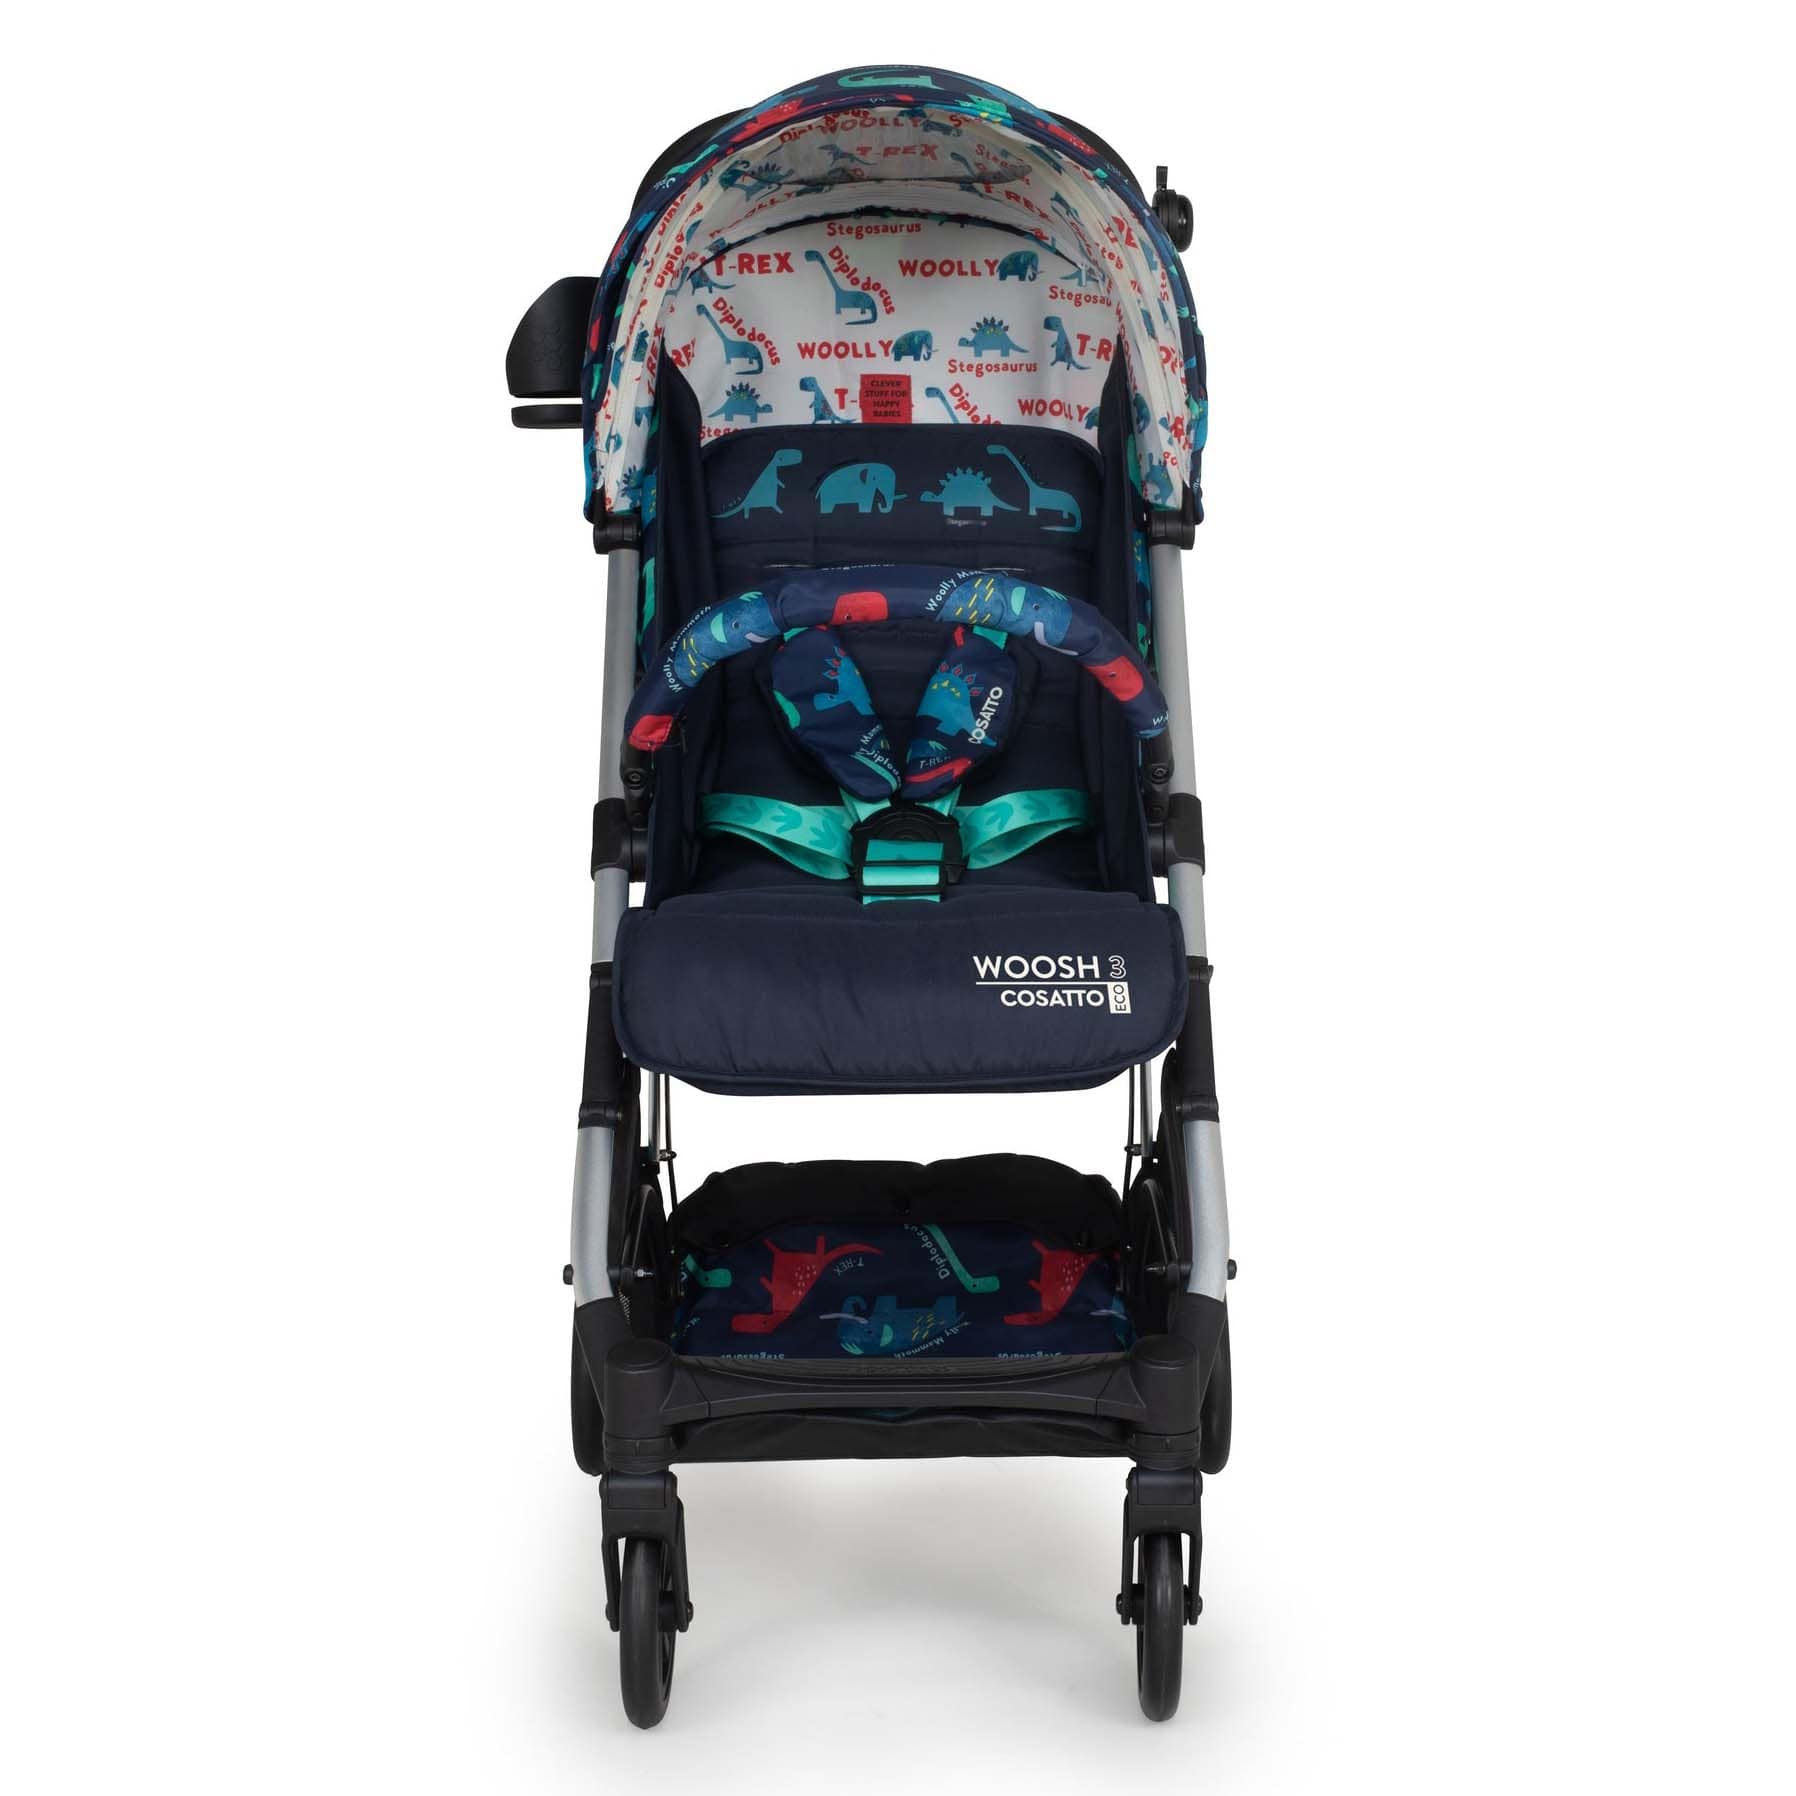 Cosatto baby pushchairs Cosatto Woosh 3 Stroller D is for Dino CT5055